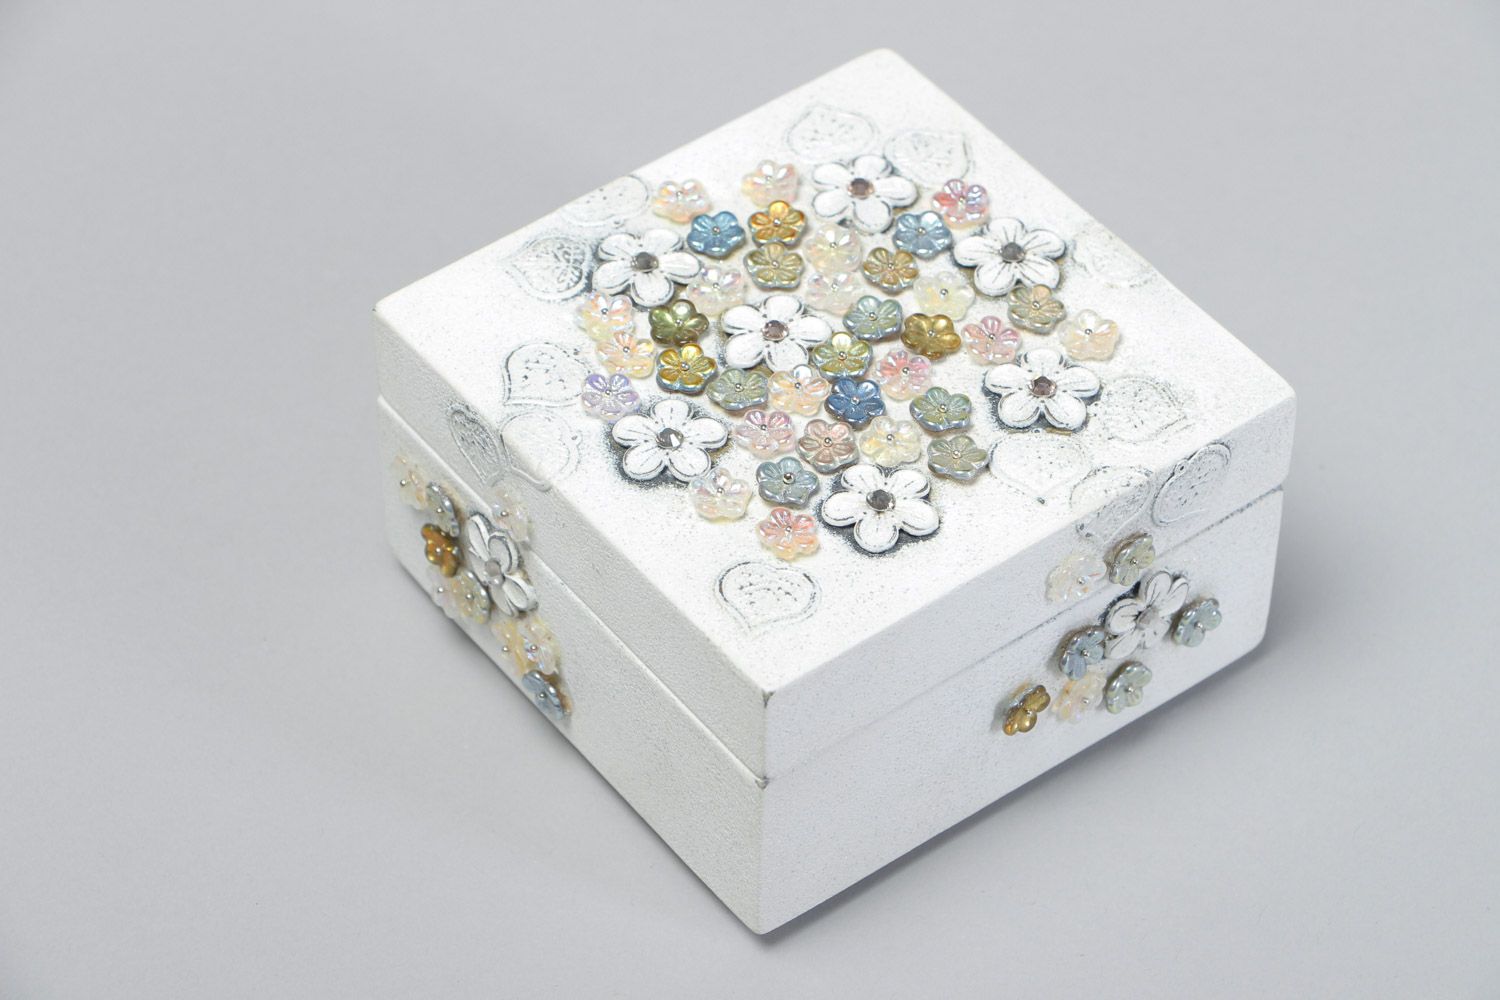 Handmade magnificent white jewelry box inlaid with glass and metal elements photo 2